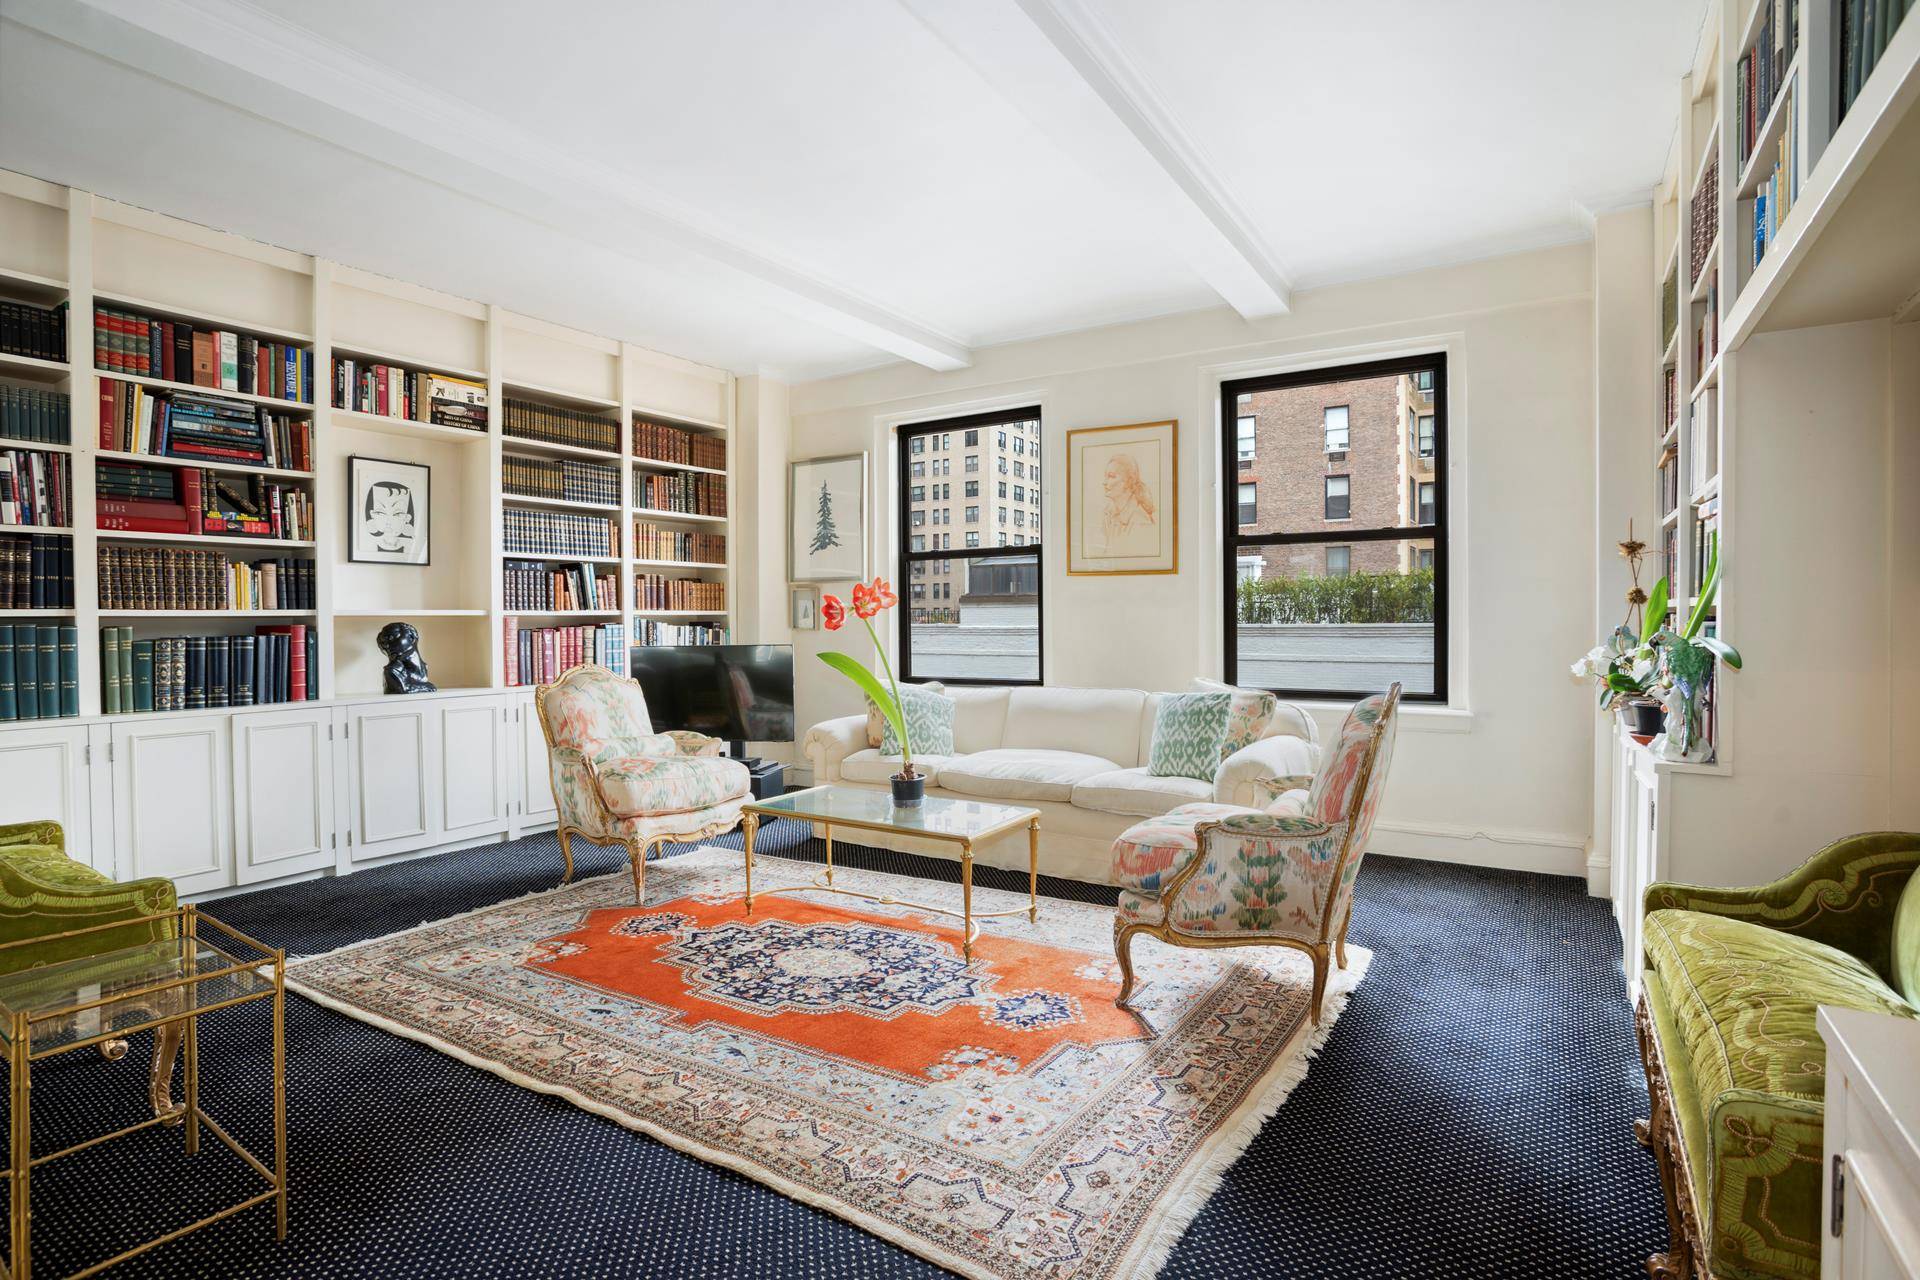 Located in the prestigious neighborhood of Carnegie Hill, 1133 ParkAvenue stands as one of Uptown's most desirable full service prewarcooperatives.